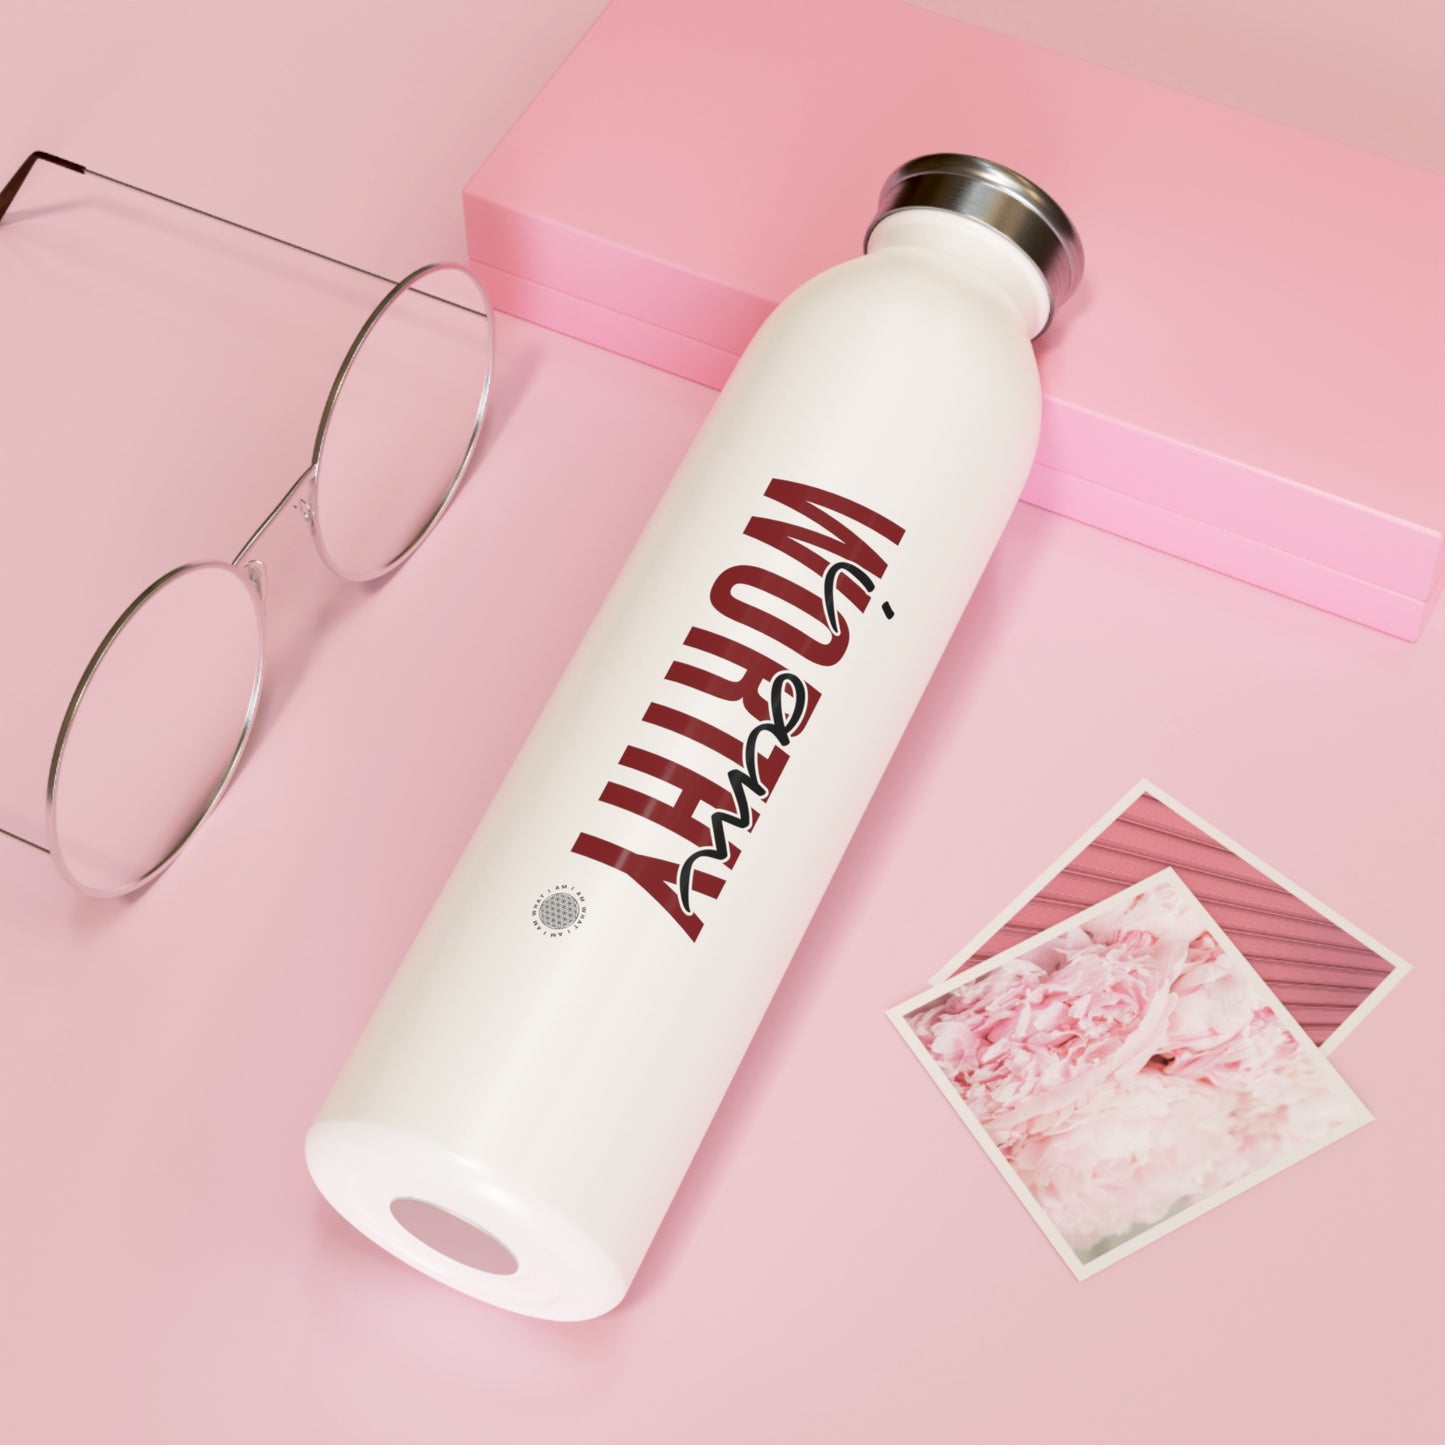 Our I Am Worthy Slim Water Bottle is the perfect way to stay hydrated on the go. This sleek and stylish bottle is made from durable stainless steel and features a double-walled vacuum insulation to keep your drinks cold for up to 24 hours.